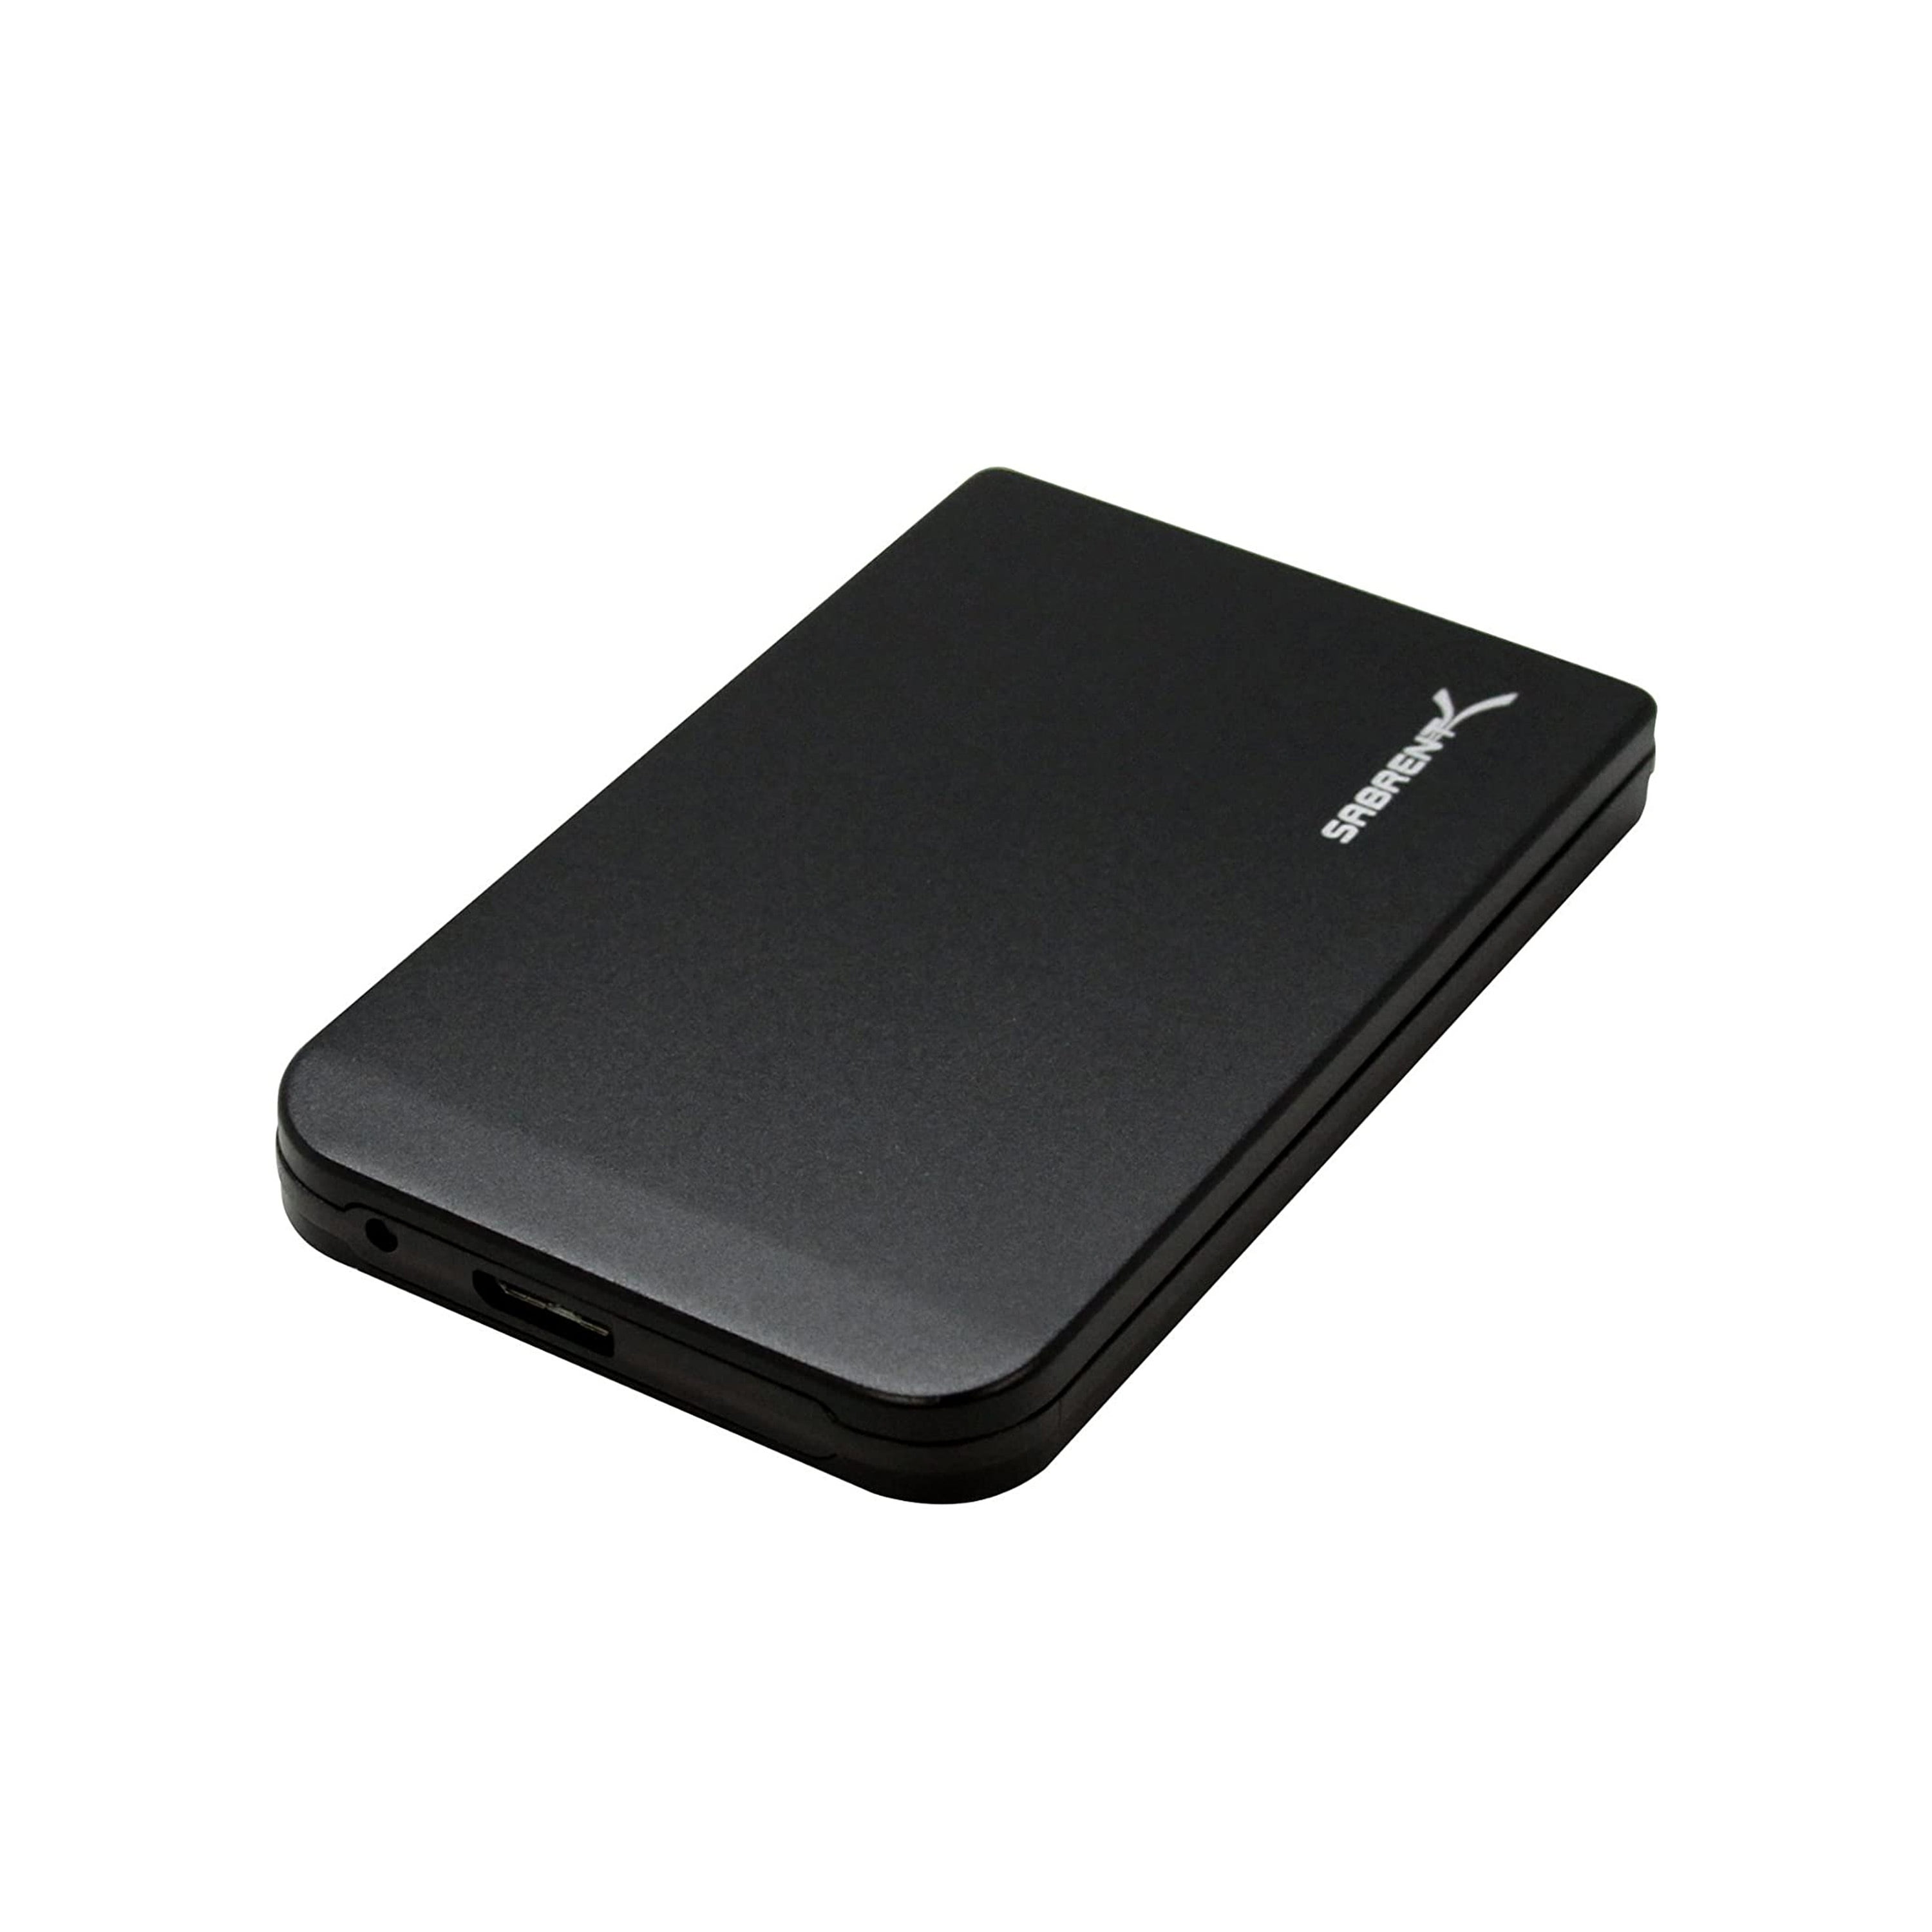 Desktop,PS4 Mac NRICO 250GB Portable External Hard Drive USB 3.0 HDD 2.5inch Storage Compatible for PC 250GB, Grey